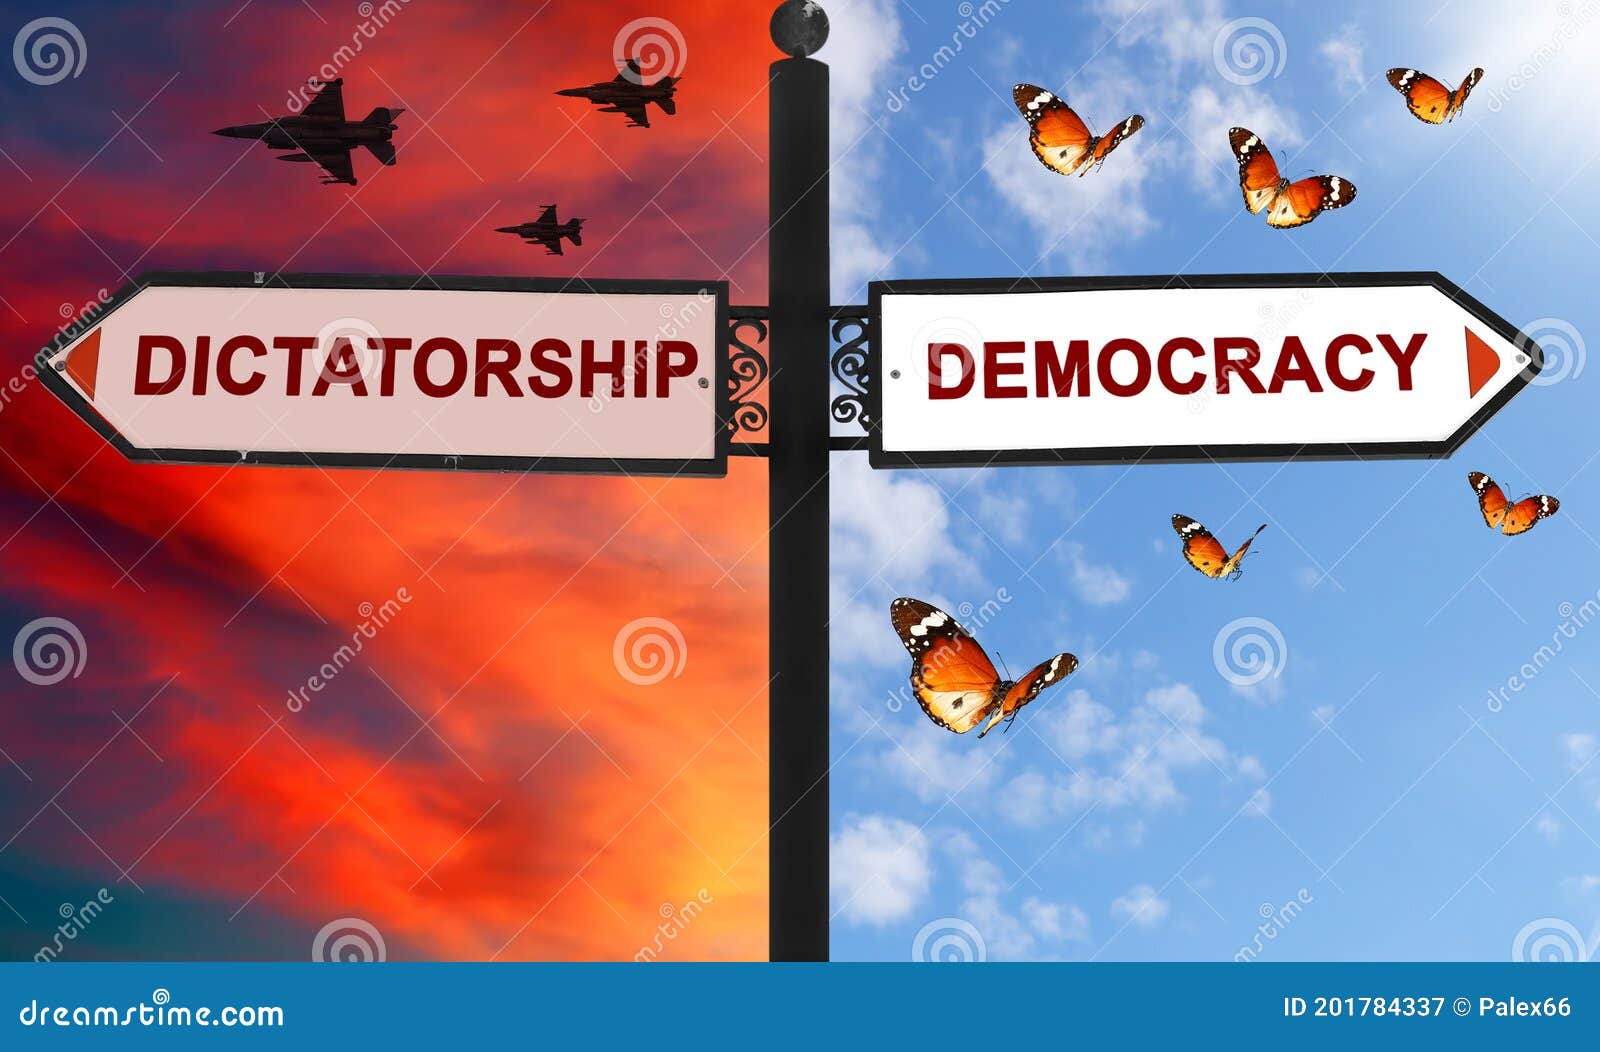 democracy or dictatorship choice on a signpost with arrows in two opposite directions